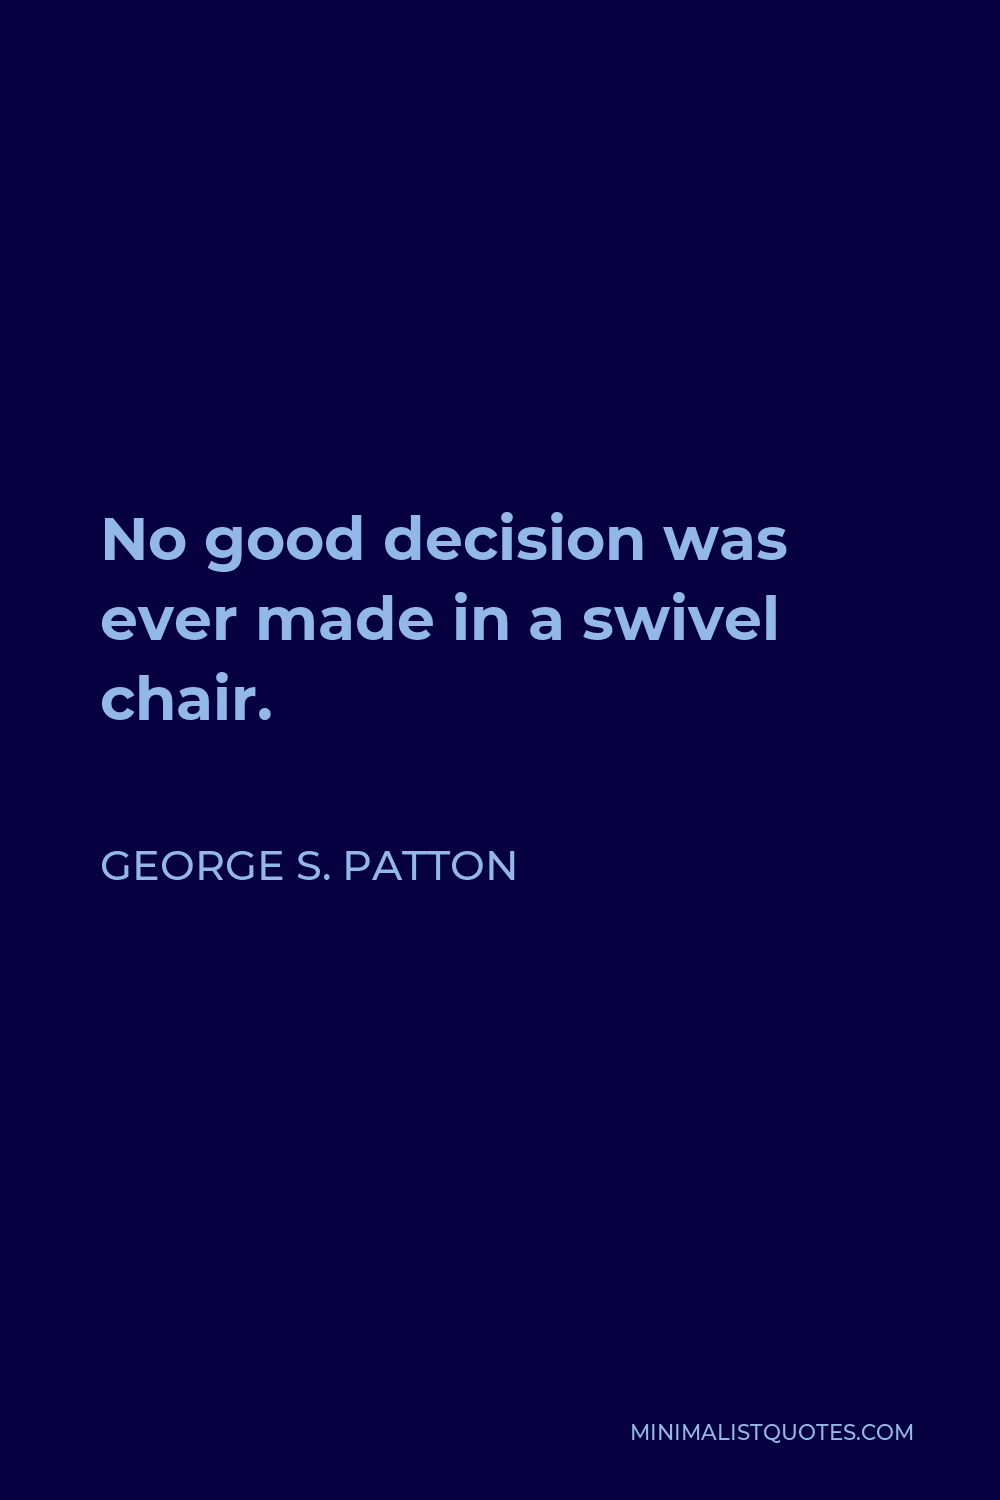 George S. Patton Quote: Moral courage is the most valuable and